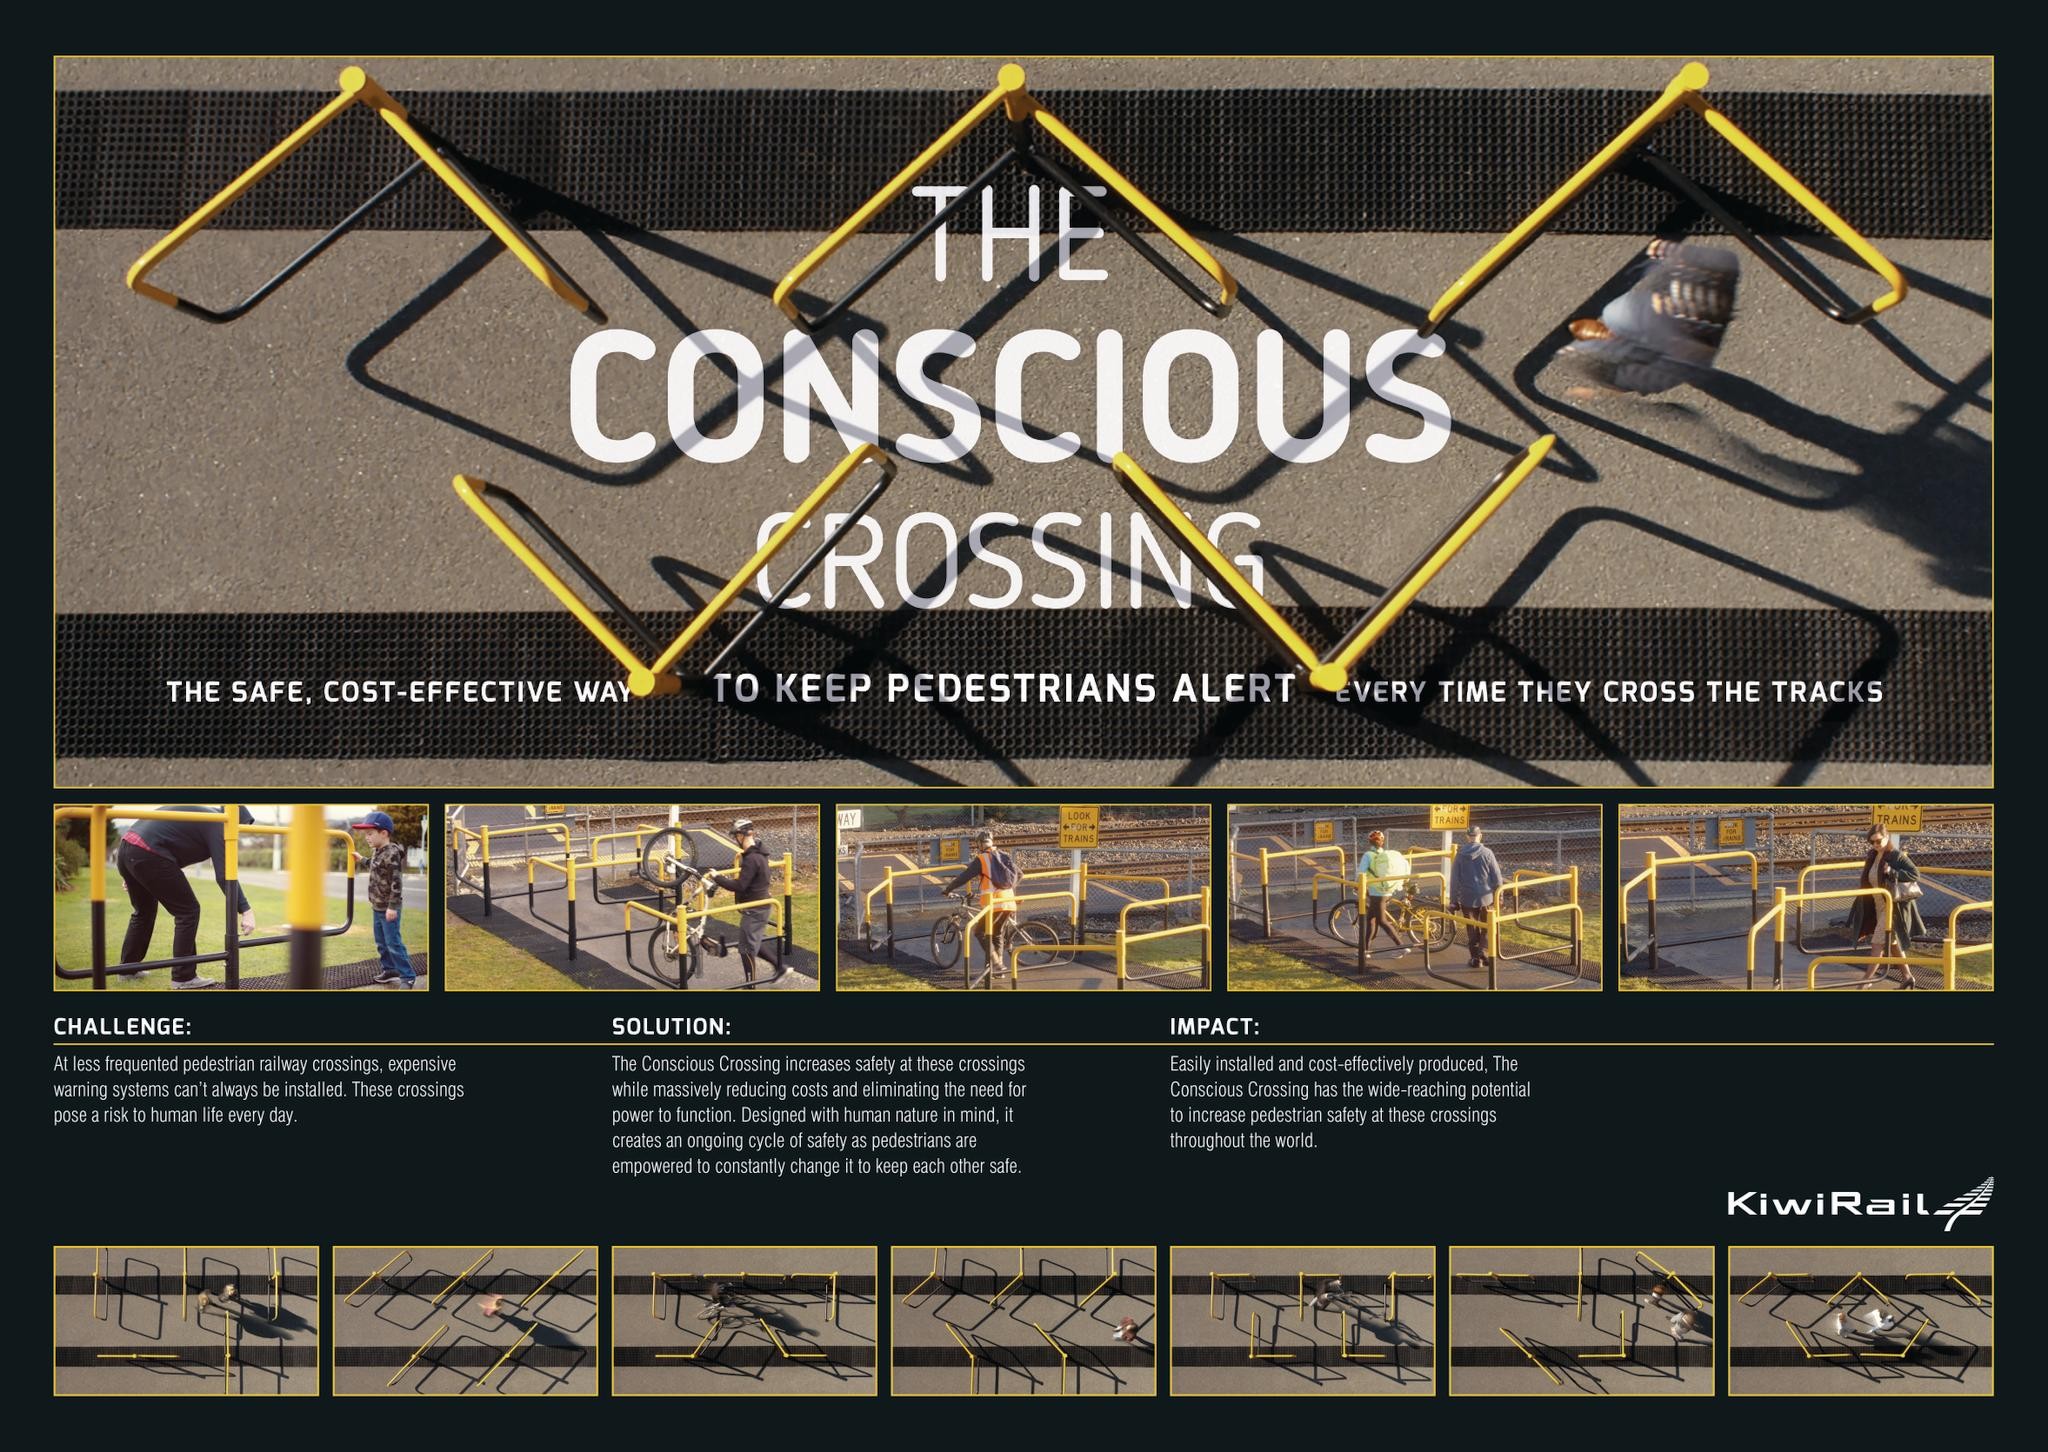 The Conscious Crossing